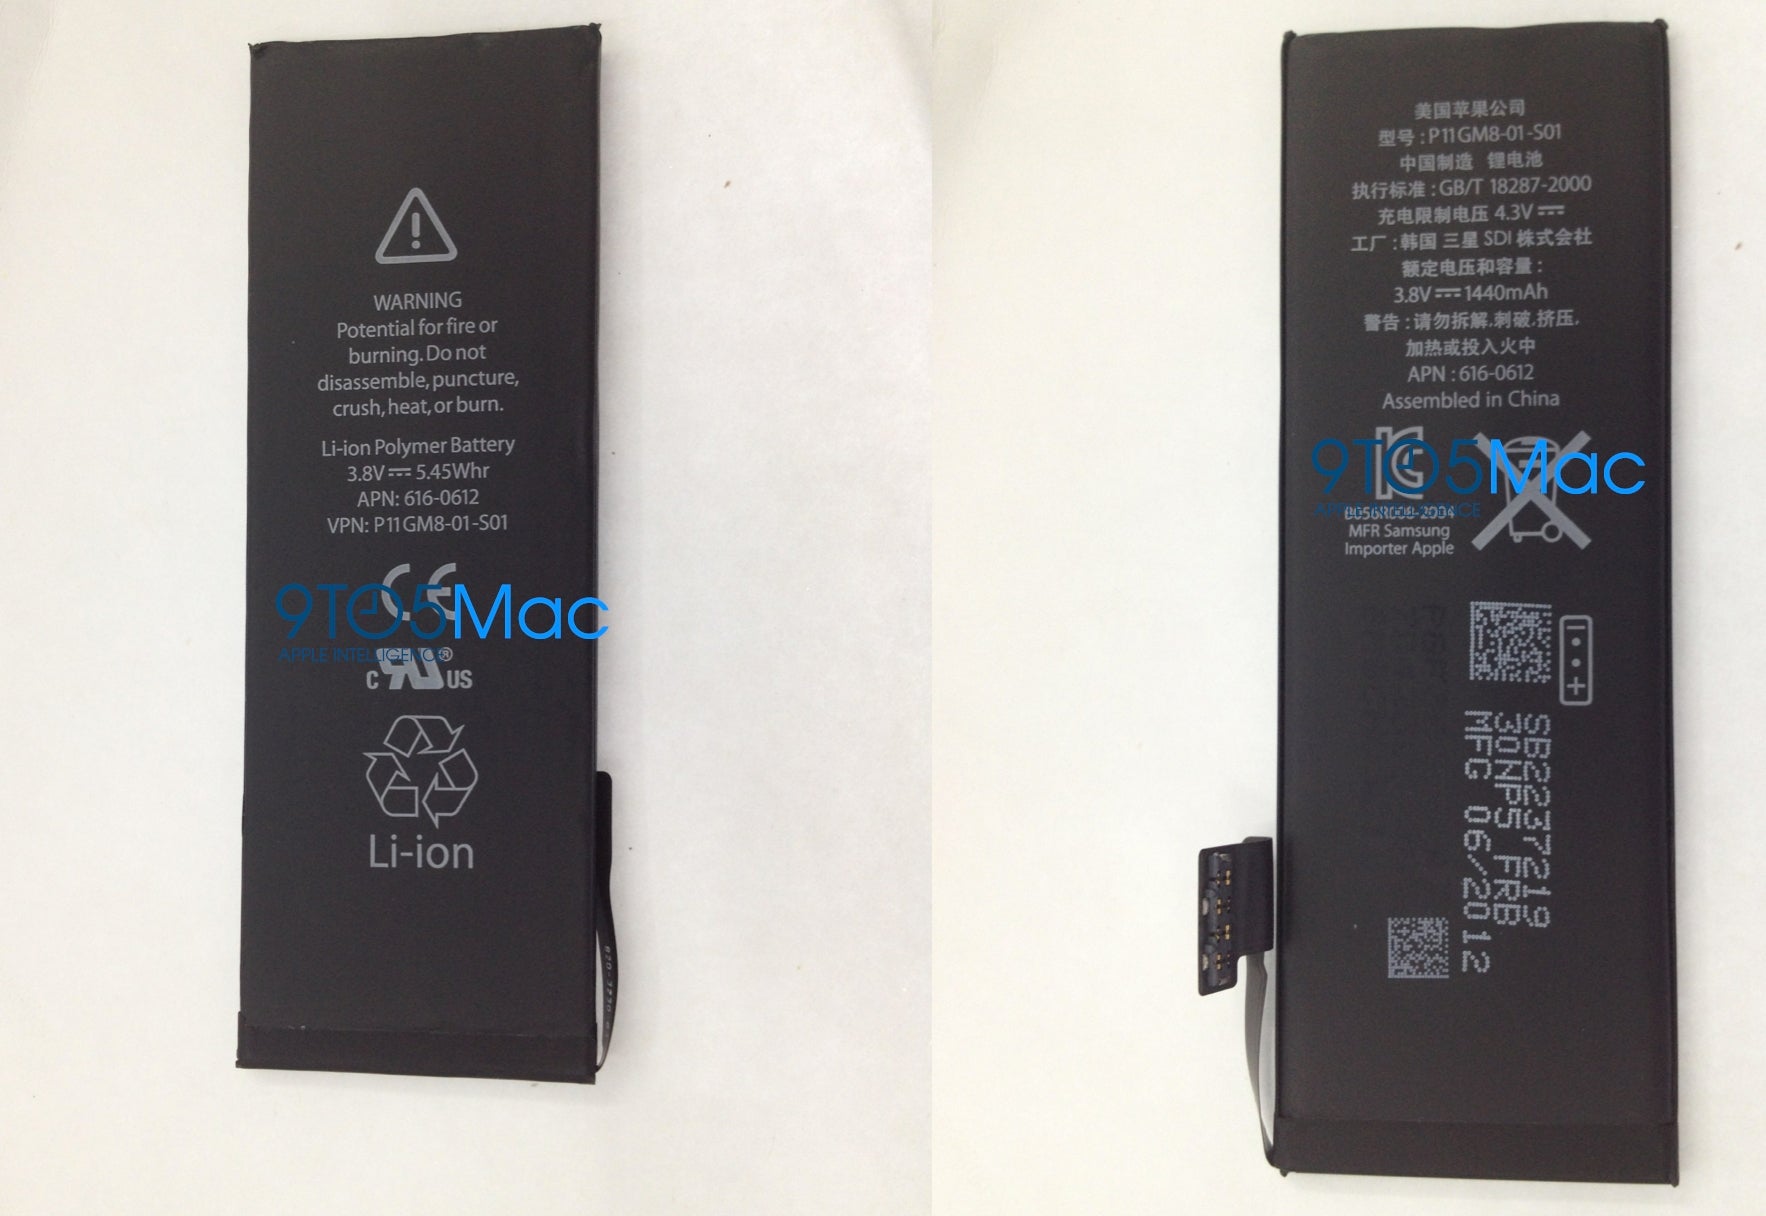 Alleged iPhone 5 battery leaks, capacity barely changed